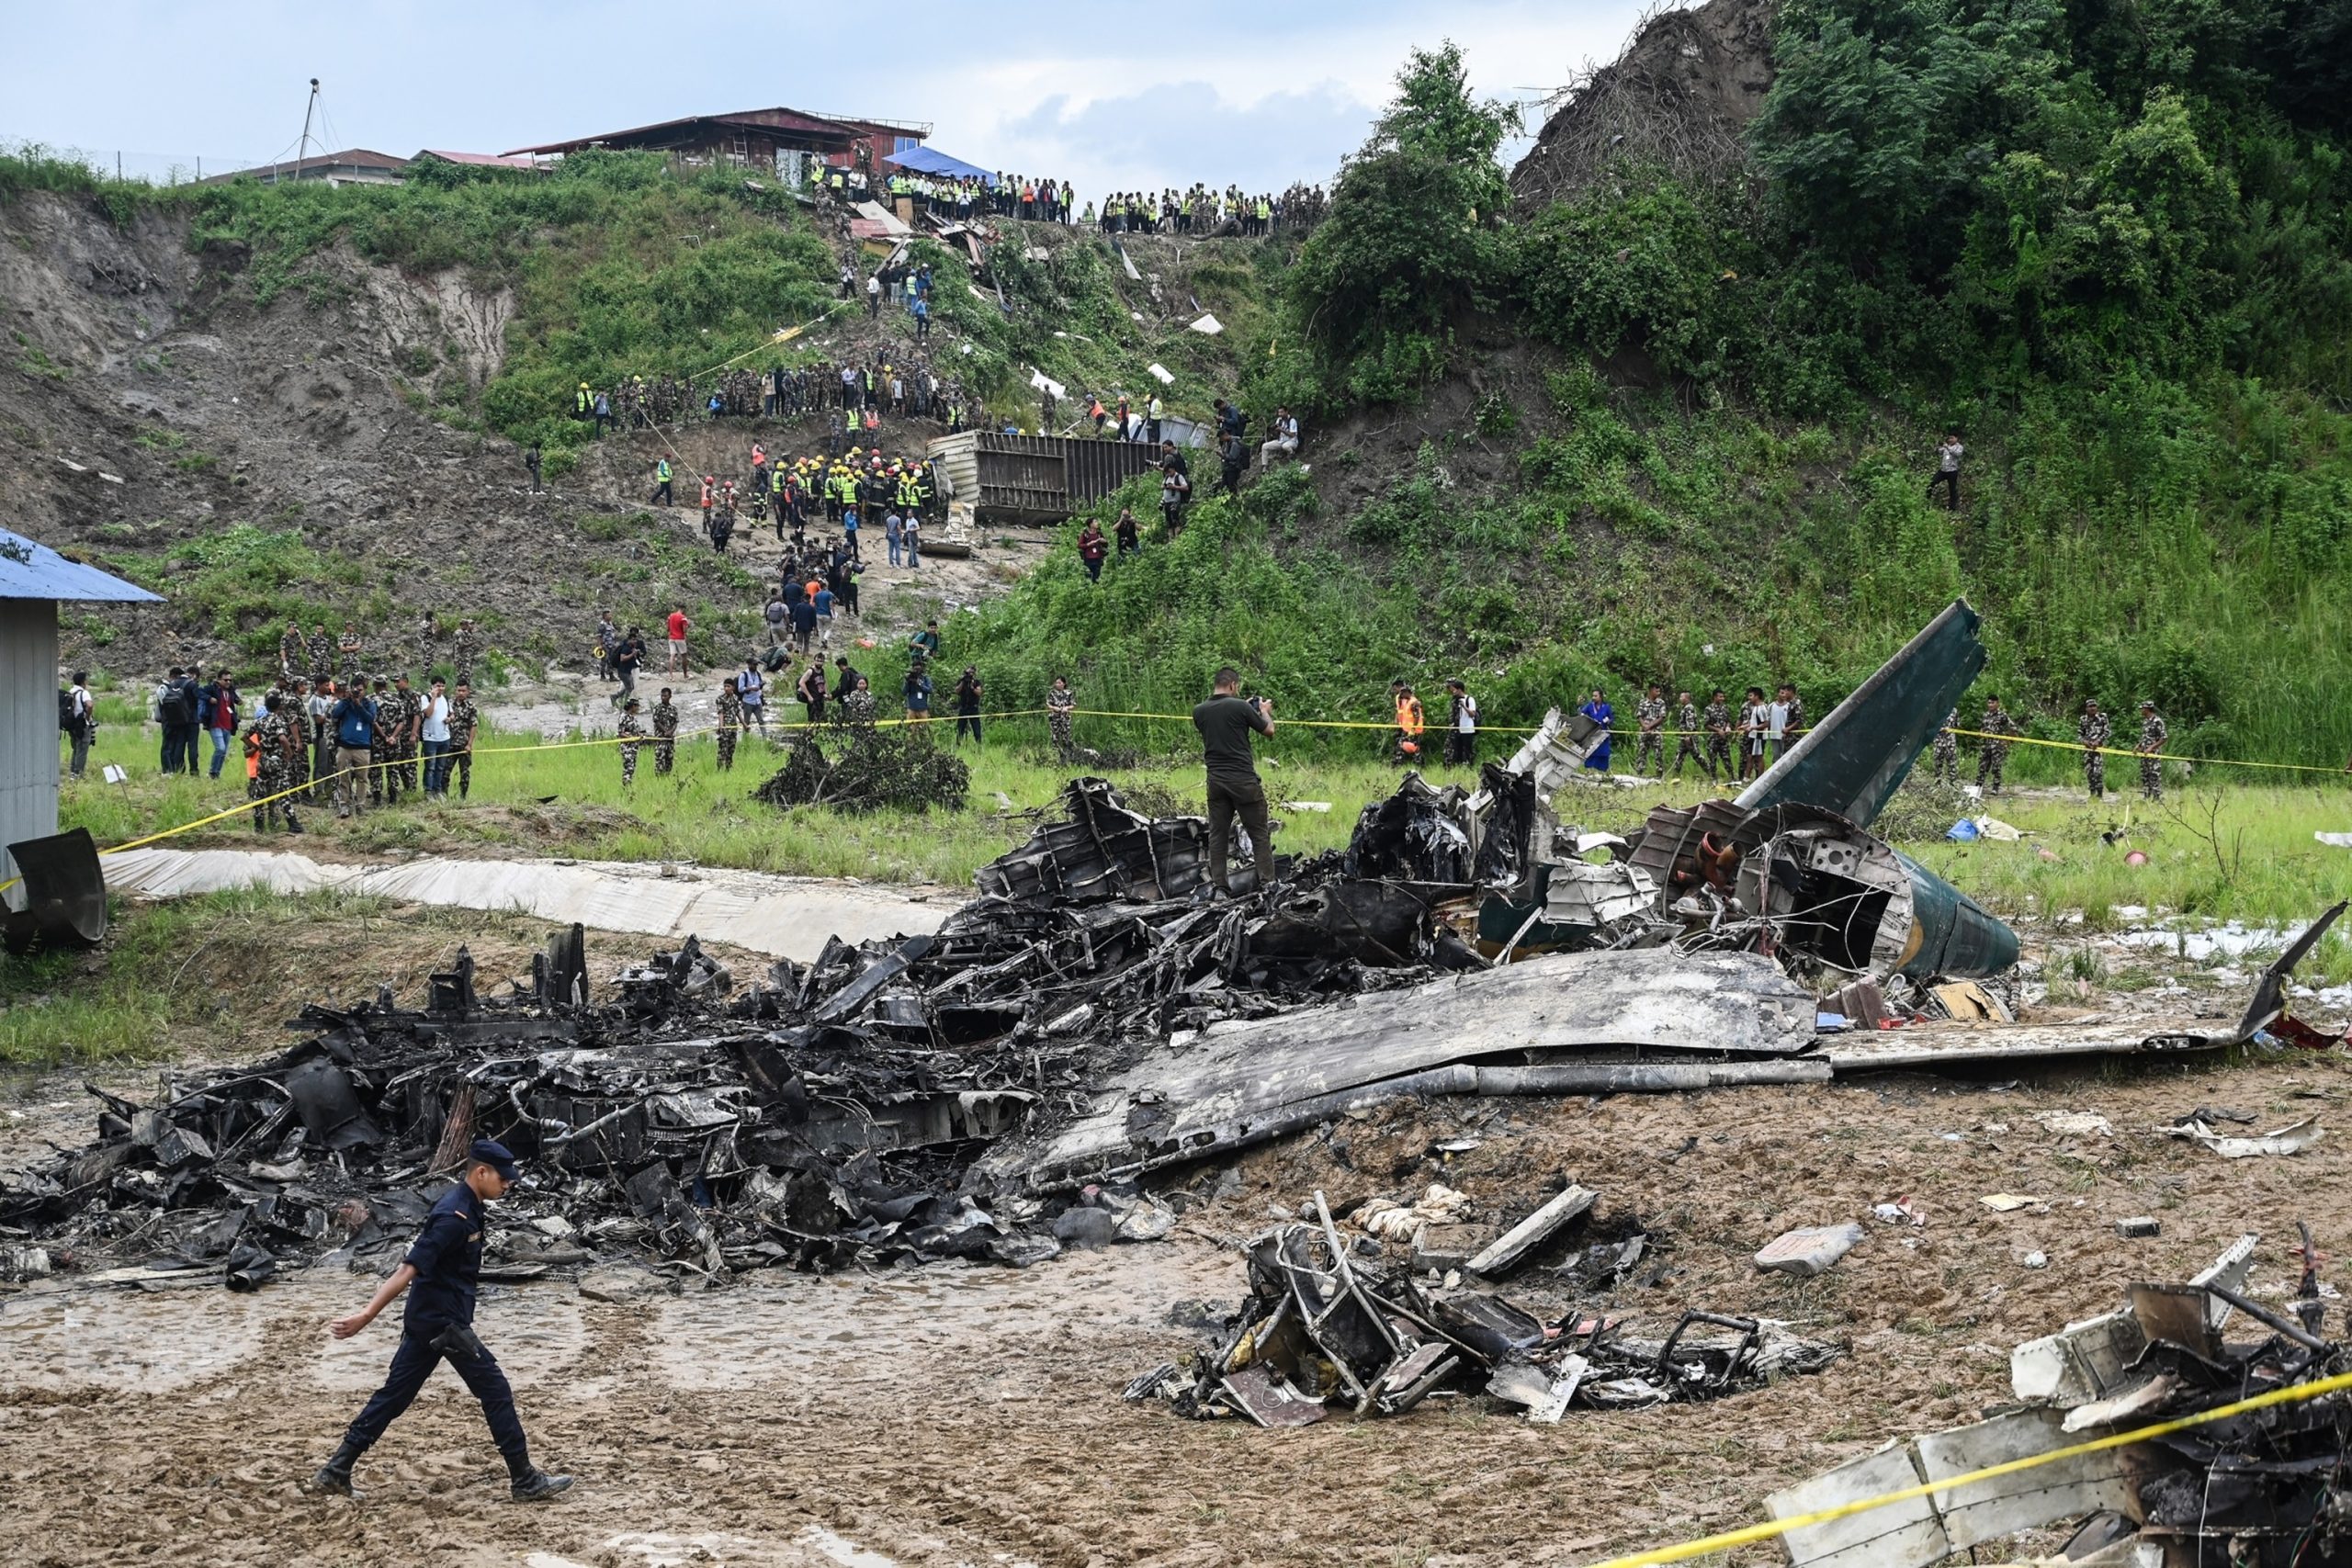 Aviation officials confirm 18 fatalities in Nepal passenger plane crash during takeoff